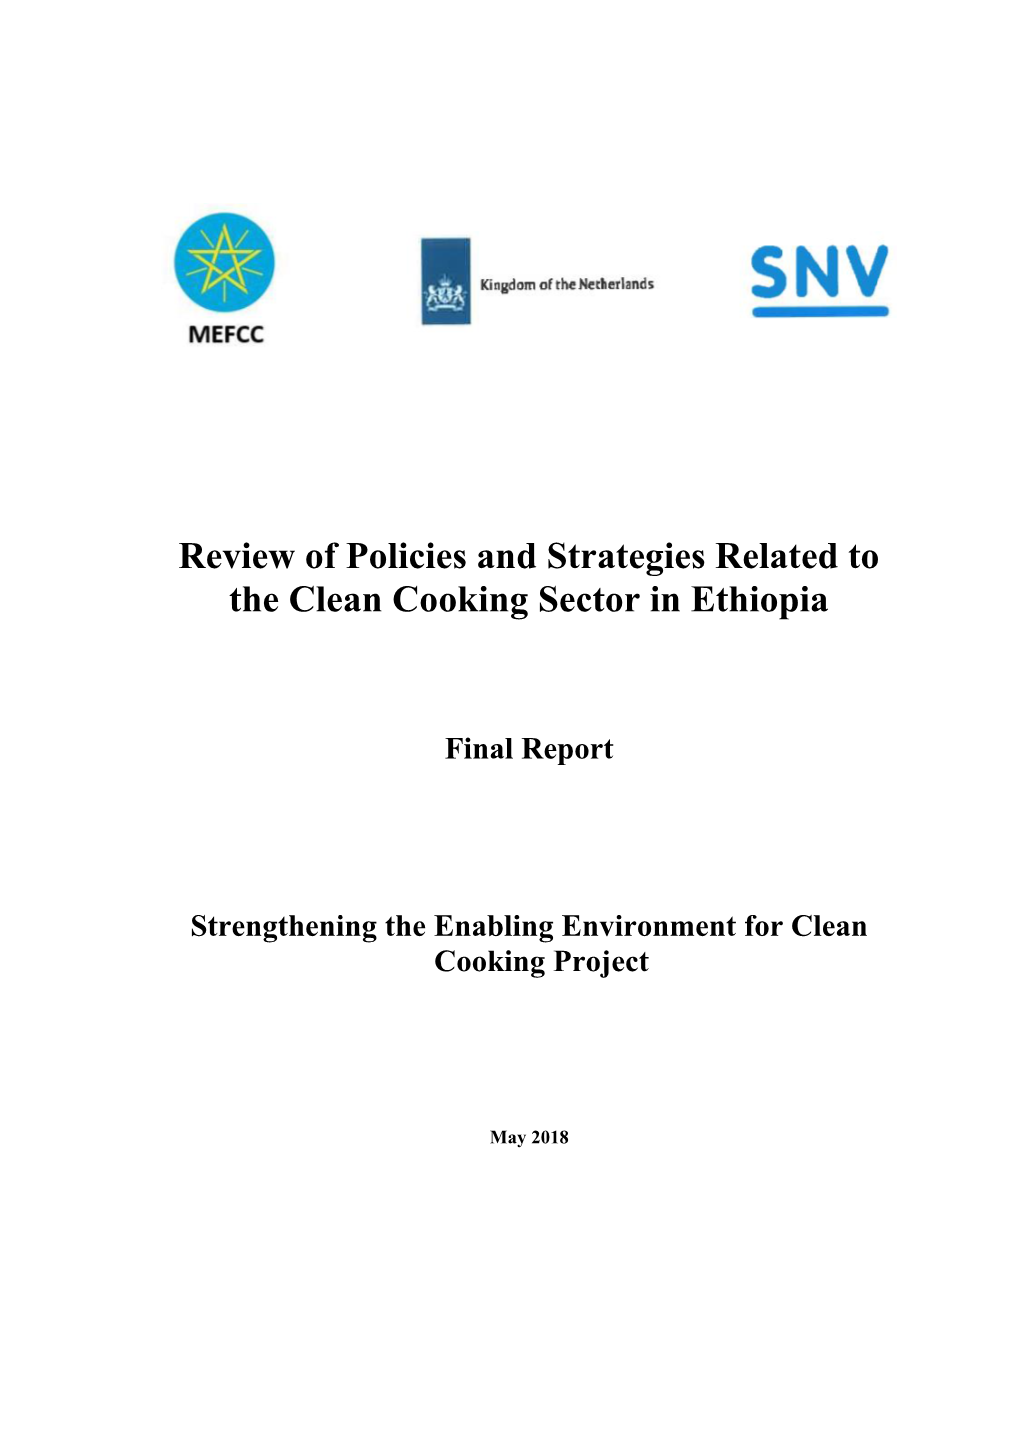 Review of Policies and Strategies Related to the Clean Cooking Sector in Ethiopia